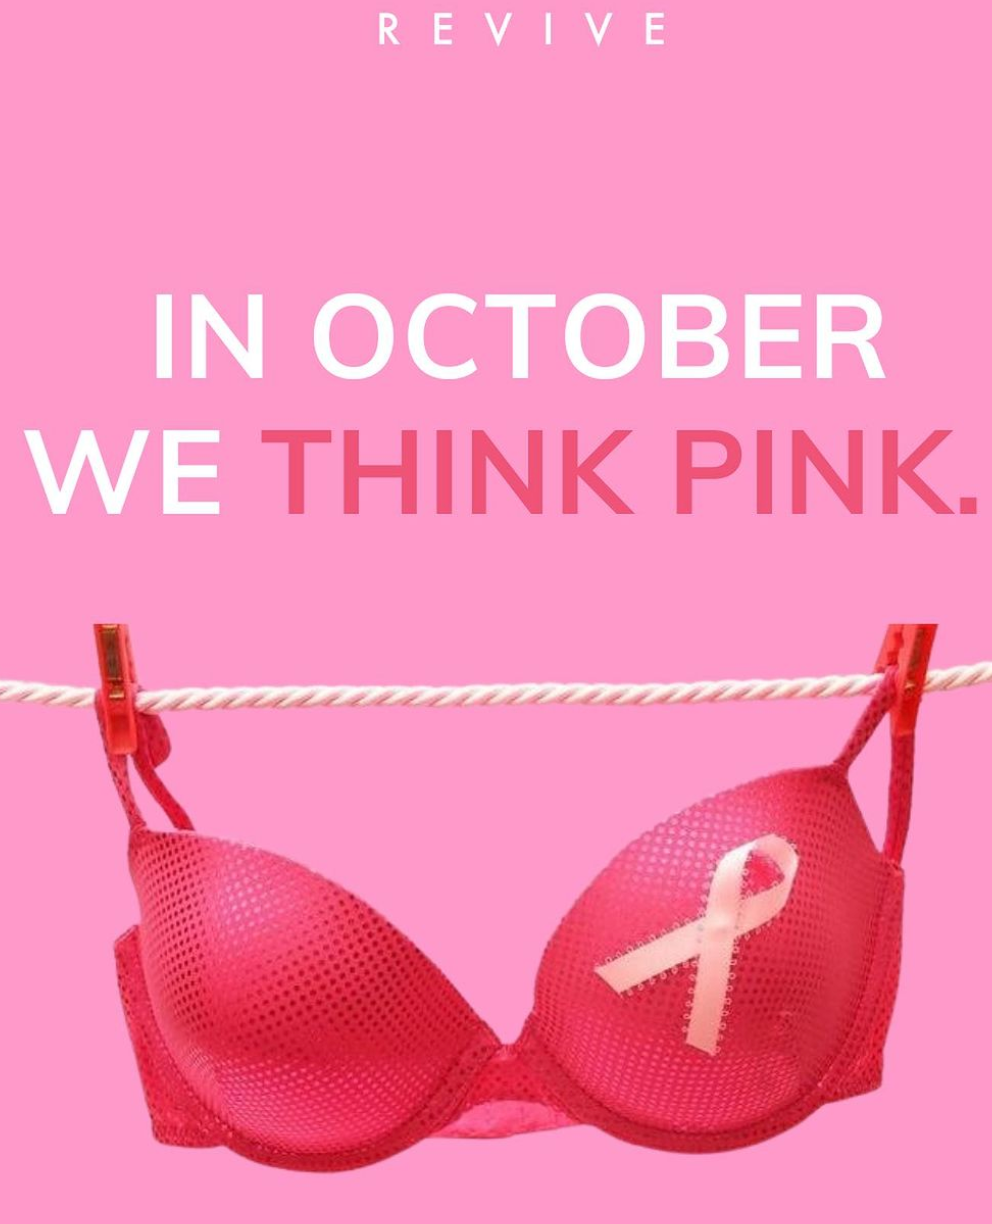 It's Breast Cancer Awareness Month